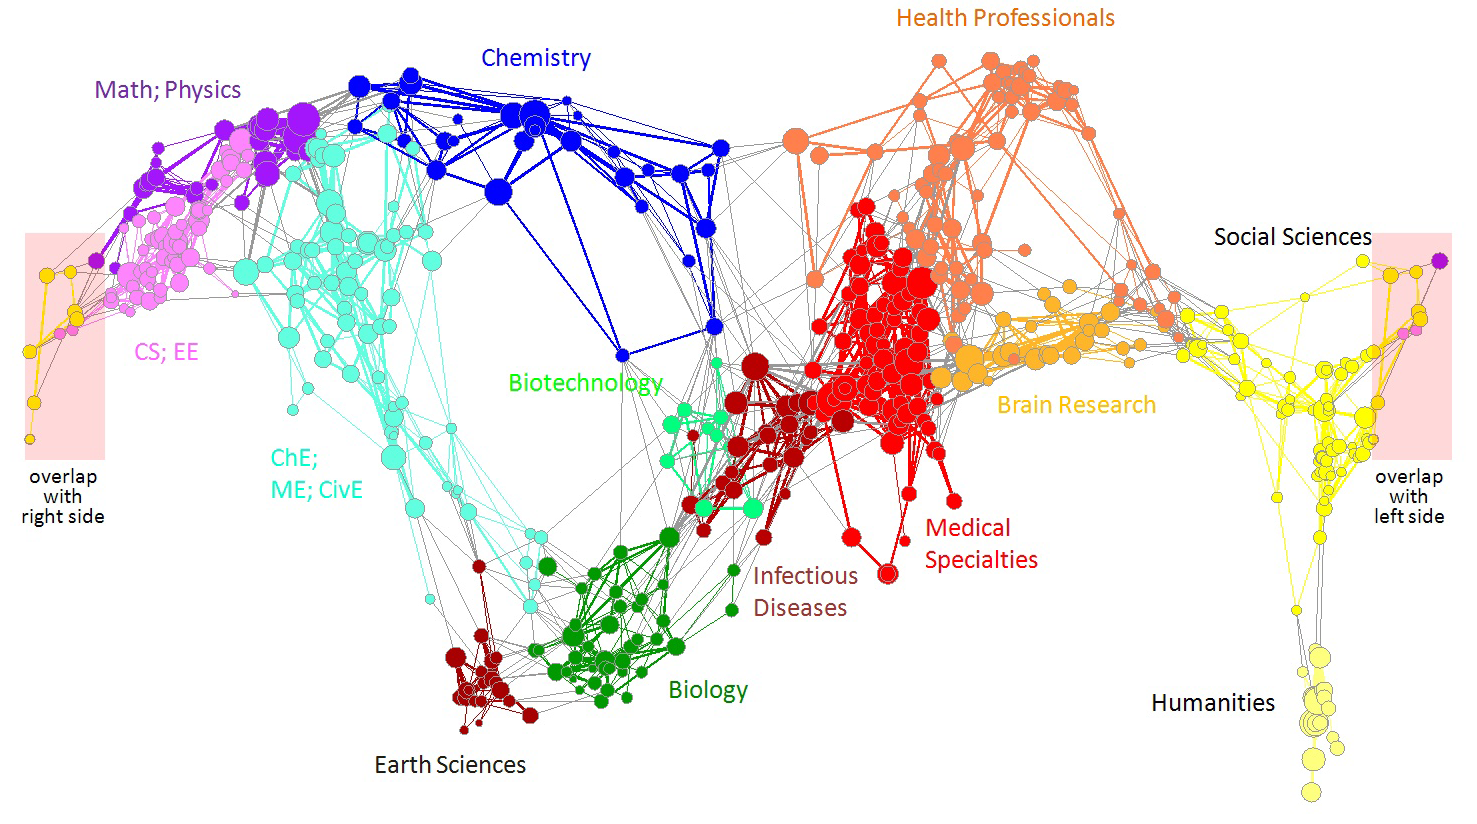 A map of science where different subregions have a different color that is used for both nodes and links.